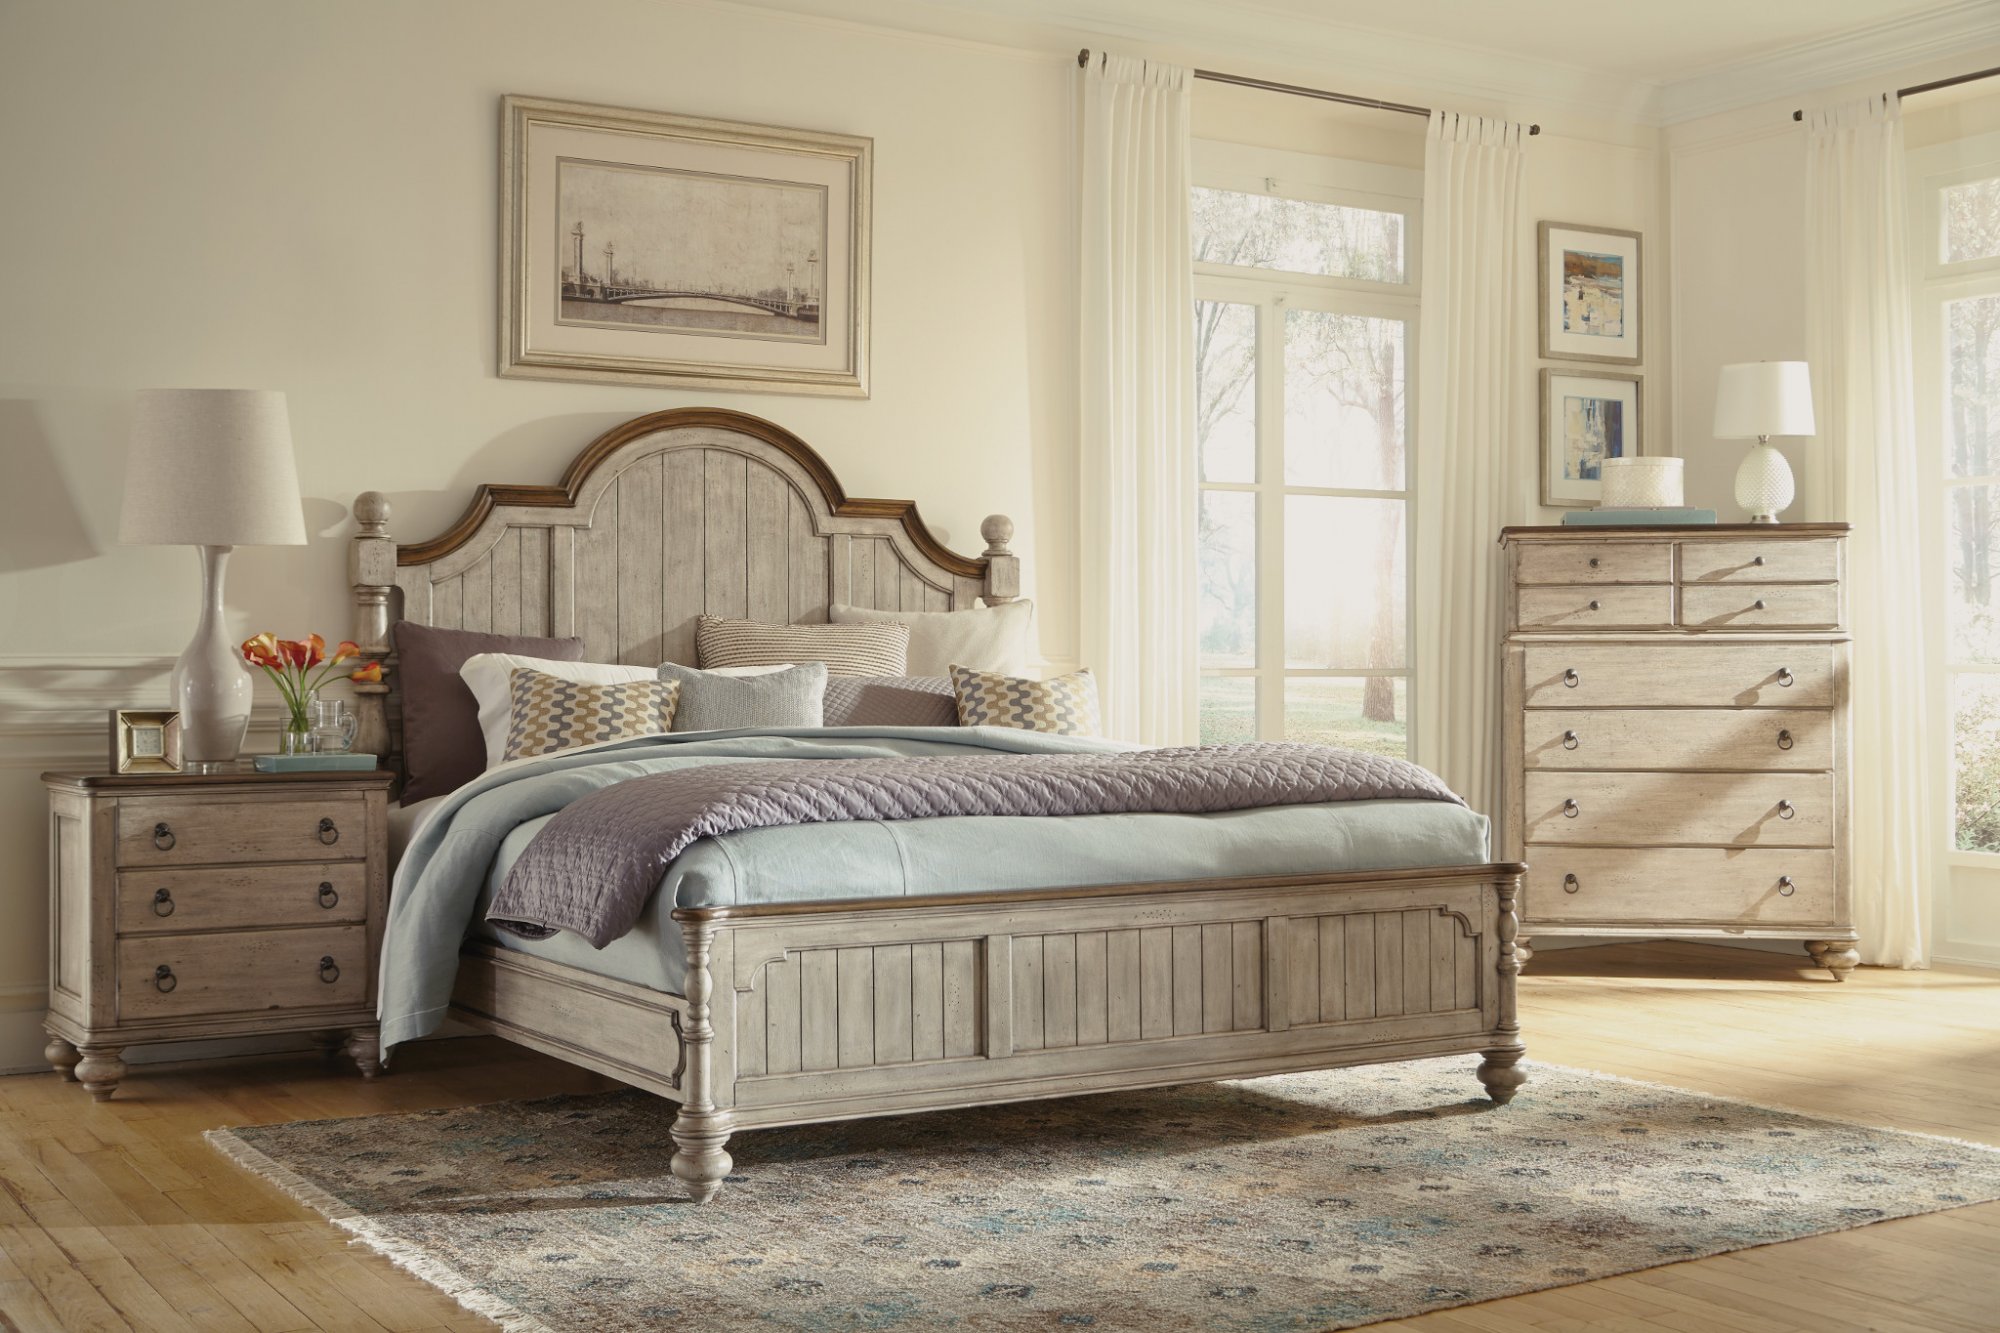 Flexsteel king bed with wooden headboard in traditional style bedroom